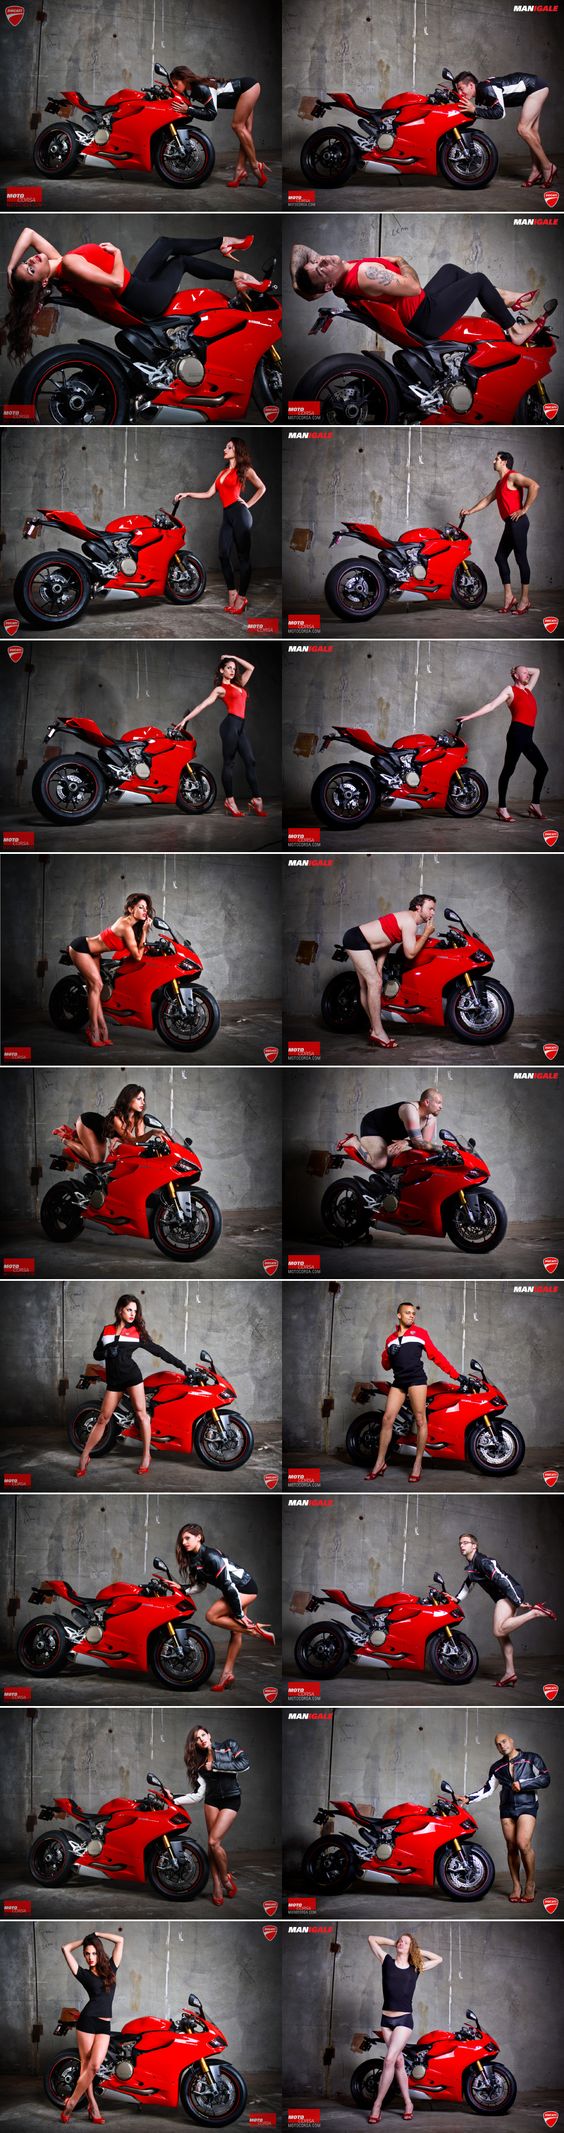 Ducati ad parody - Psst! It’s the bike that’s for sale. But when models seductively languish over motorcycles, prospective customers may forget that. Arun Sharma, the general manager of a Ducati dealership in Portland, Oregon, understands this truth. That’s why commissioned a series of images of men and women flaunting their bodies on the Ducati 1199 Panigale sportsbike. The women are beautiful. The men are…well, let’s just say that they have excellent personalities.